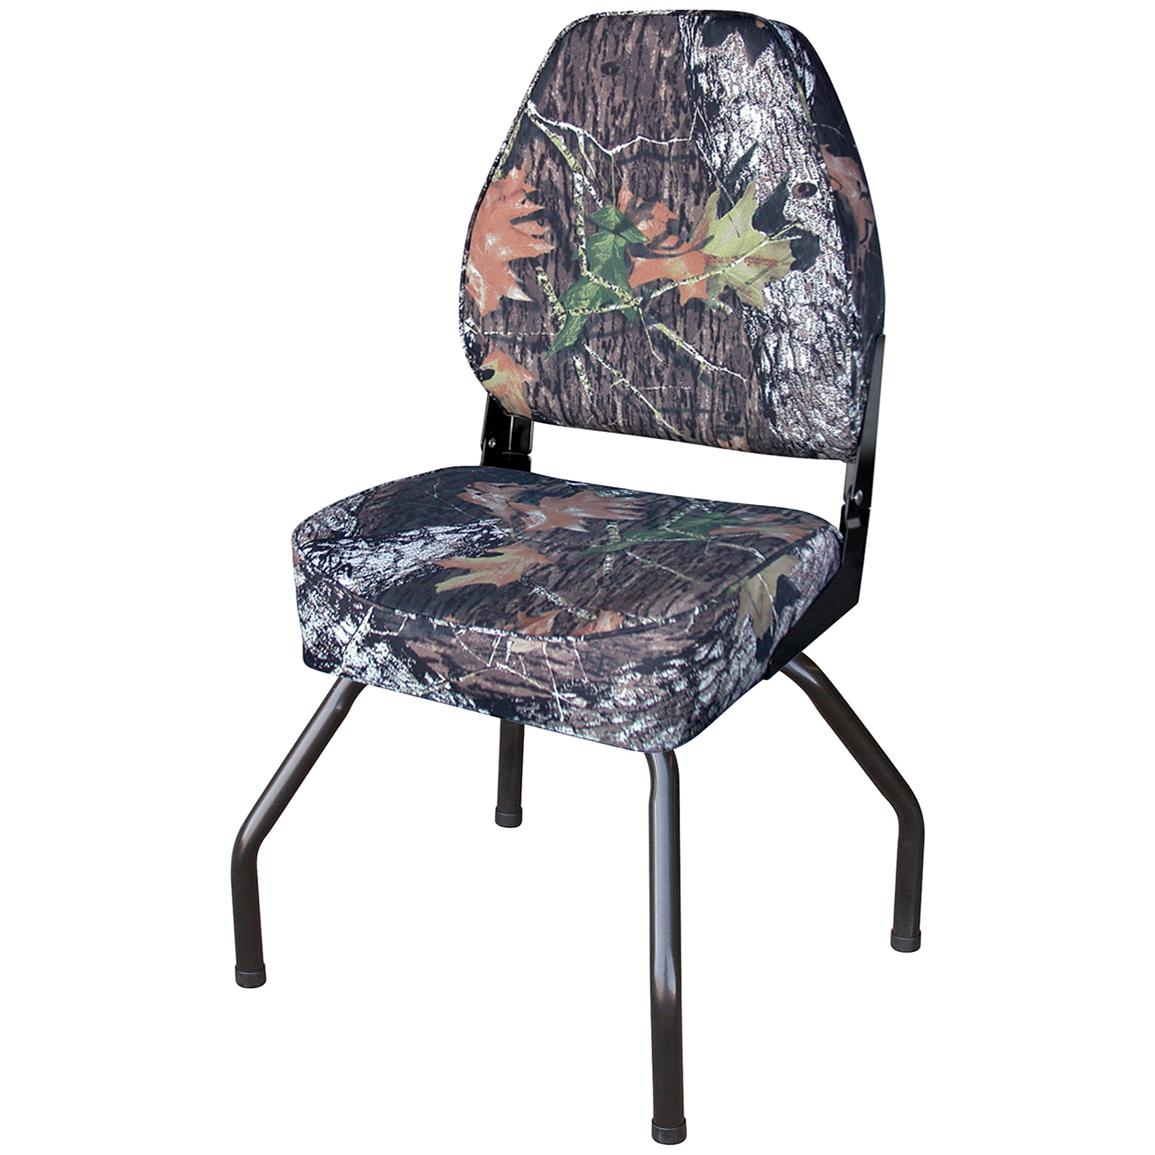 Wise Combo Duck Boat Hunting Blind Seat 204002 Fishing